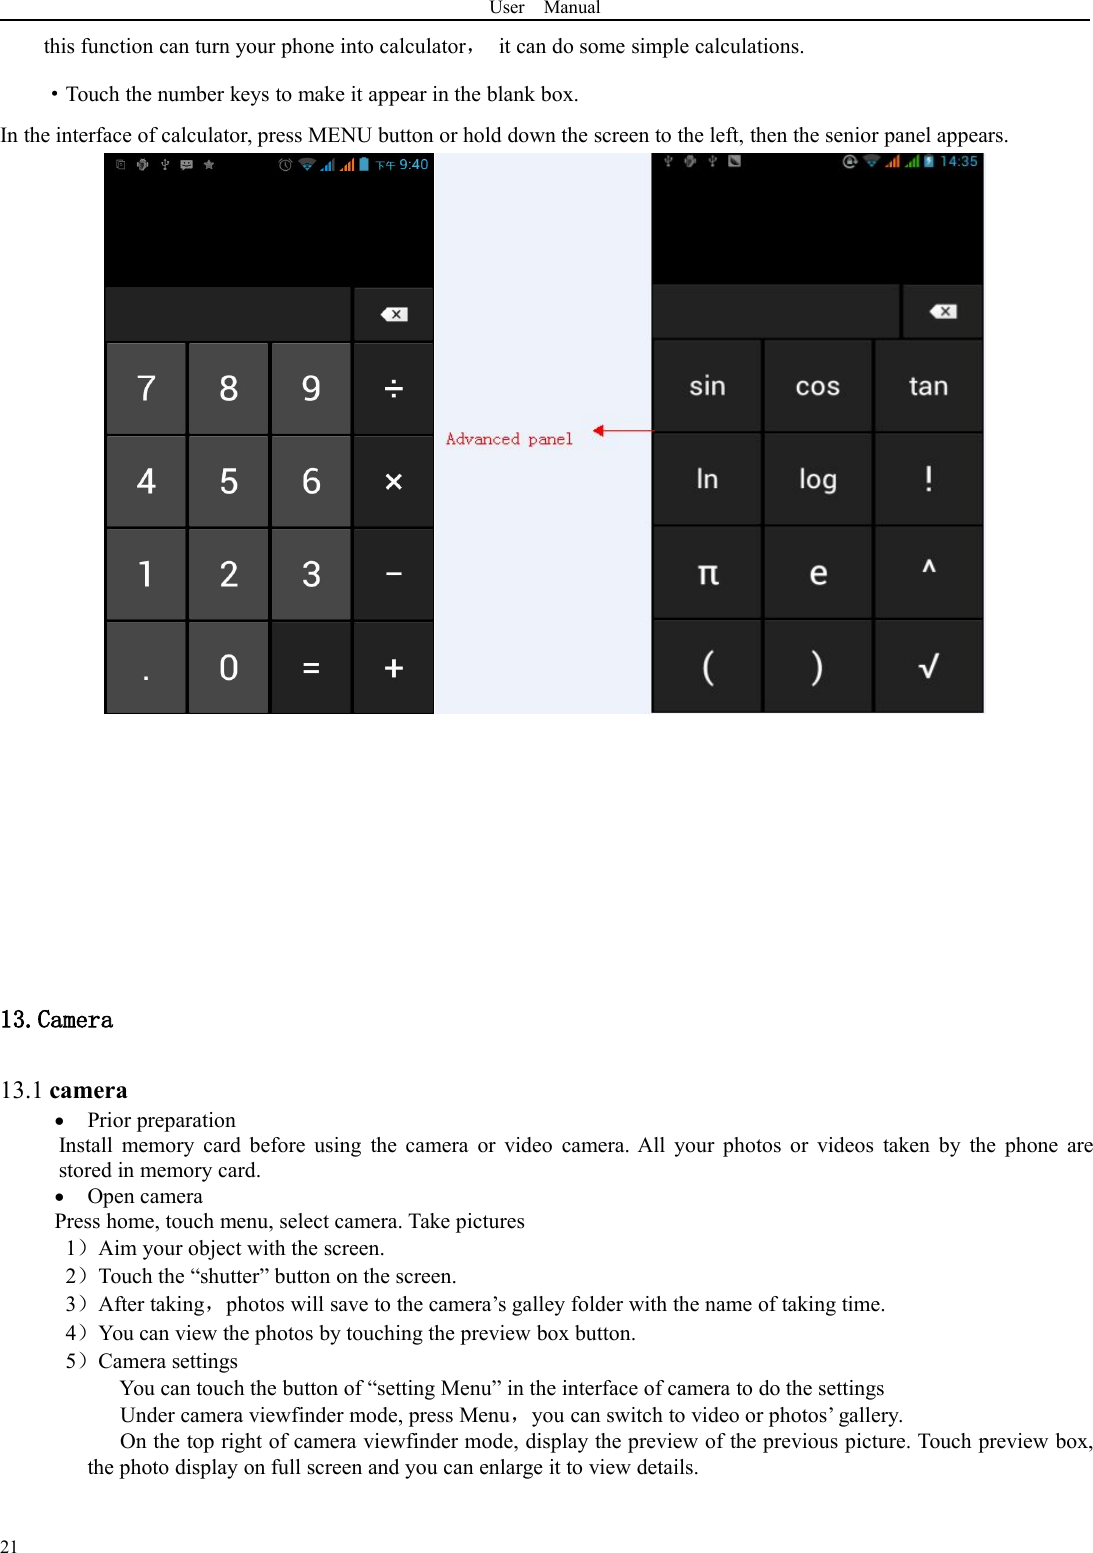 User Manual21this function can turn your phone into calculator，it can do some simple calculations.·Touch the number keys to make it appear in the blank box.In the interface of calculator, press MENU button or hold down the screen to the left, then the senior panel appears.13.Camera13.1 cameraPrior preparationInstall memory card before using the camera or video camera. All your photos or videos taken by the phone arestored in memory card.Open cameraPress home, touch menu, select camera. Take pictures1）Aim your object with the screen.2）Touch the “shutter” button on the screen.3）After taking，photos will save to the camera’s galley folder with the name of taking time.4）You can view the photos by touching the preview box button.5）Camera settingsYou can touch the button of “setting Menu” in the interface of camera to do the settingsUnder camera viewfinder mode, press Menu，you can switch to video or photos’ gallery.On the top right of camera viewfinder mode, display the preview of the previous picture. Touch preview box,the photo display on full screen and you can enlarge it to view details.